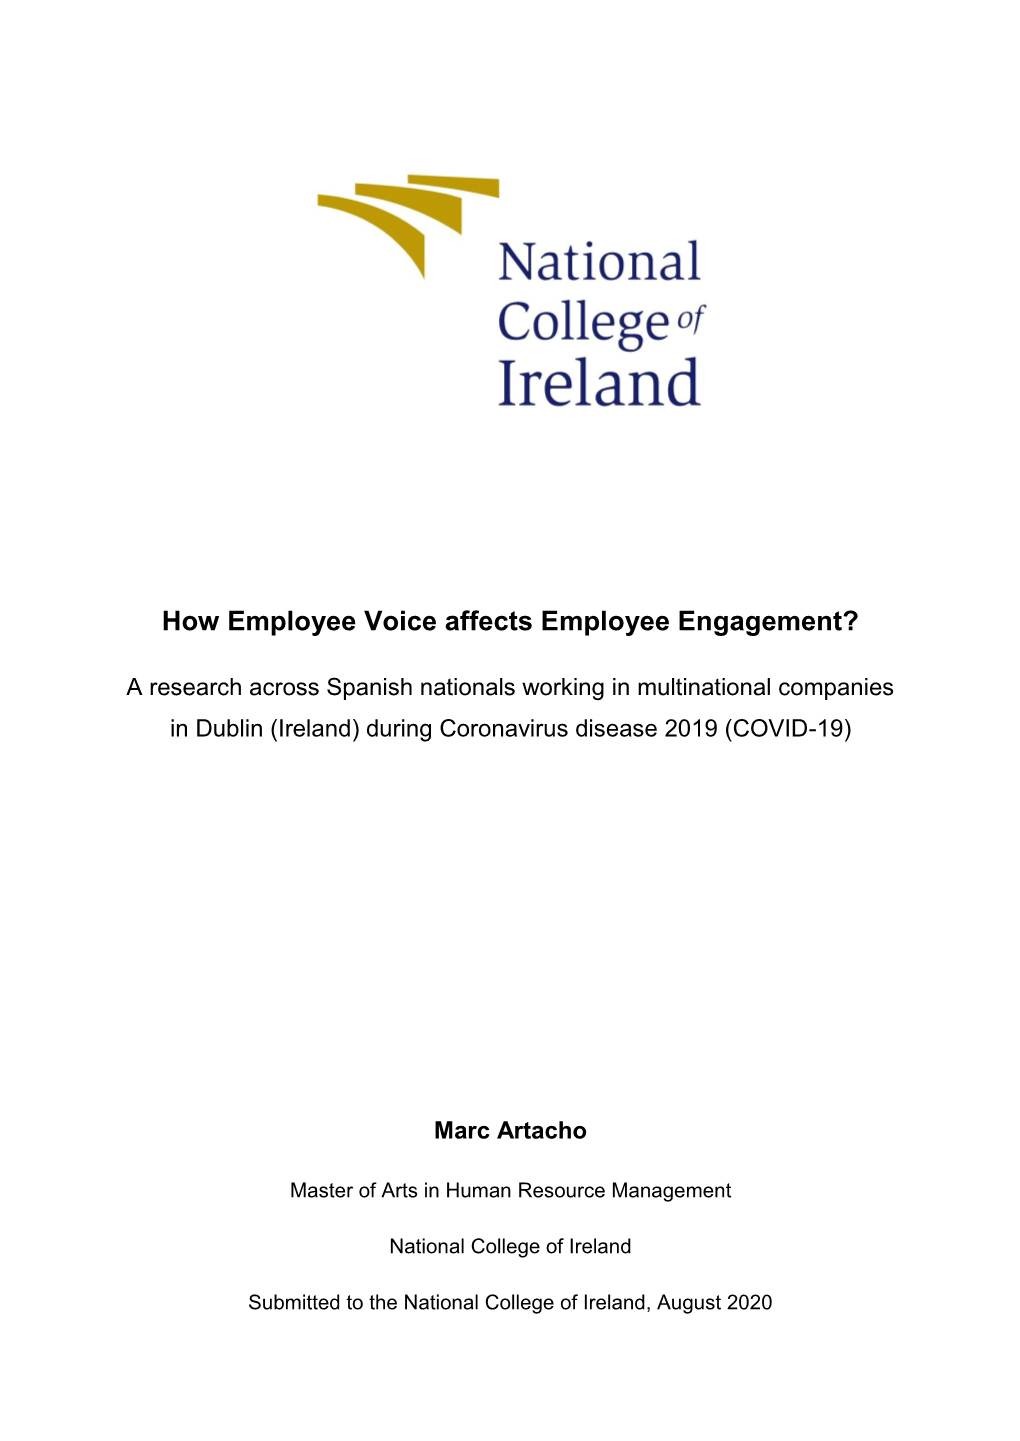 How Employee Voice Affects Employee Engagement?